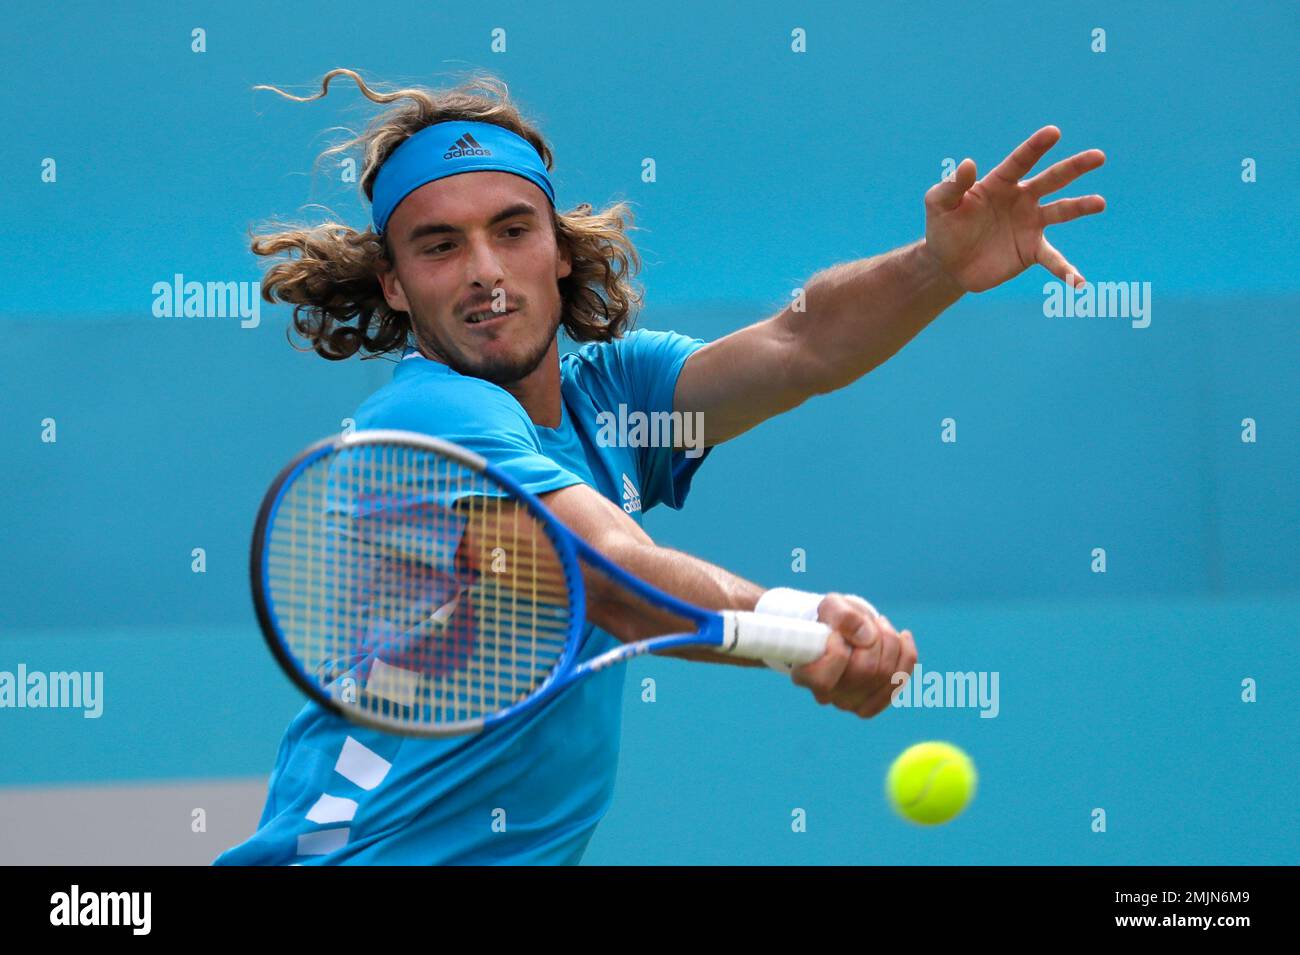 Stefanos Tsitsipas of Greece plays a return to Felix Auger-Aliassime of Canada during their quarterfinal singles match at the Queens Club tennis tournament in London, Friday, June 21, 2019